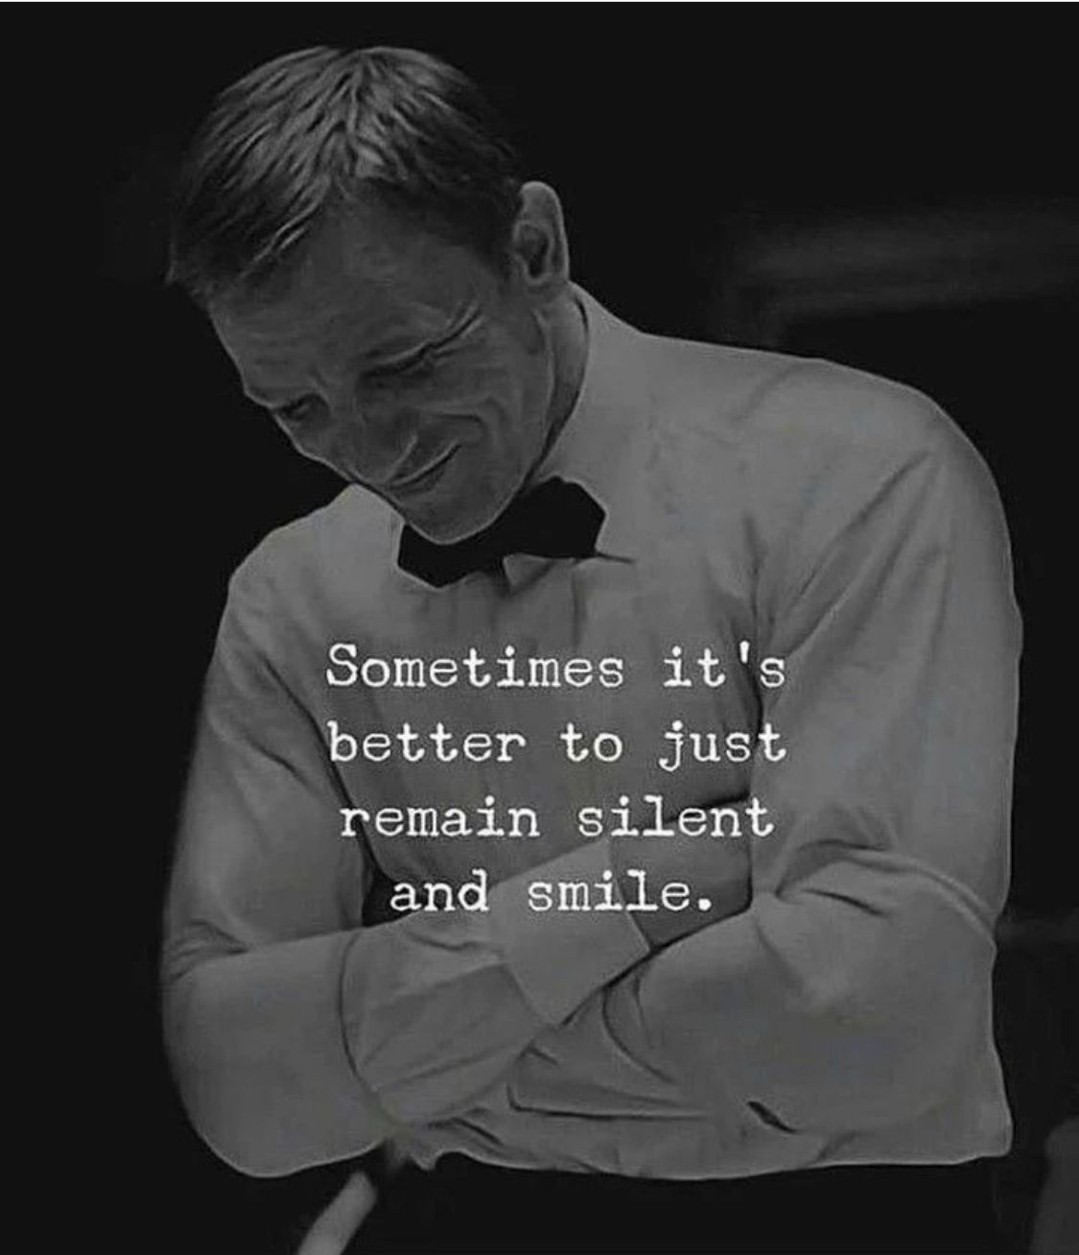 Sometimes it ts better to jus remain silent and smile.